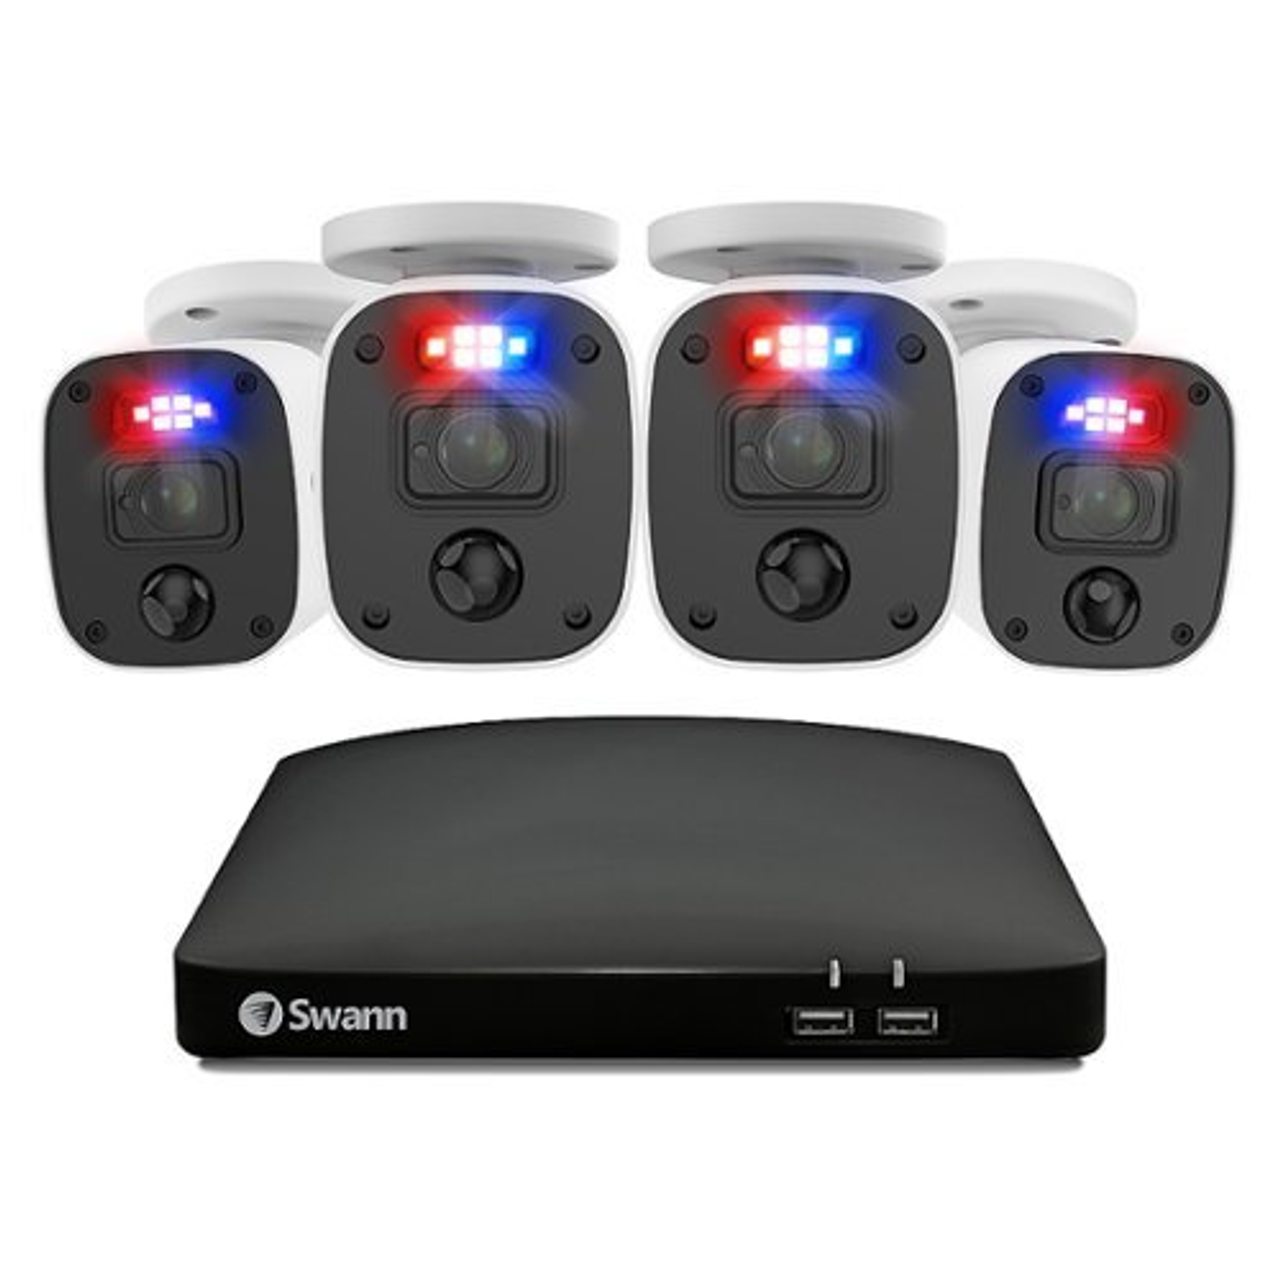 Swann - Enforcer 8 Channel, 4 Camera Indoor/Outdoor, Wired 1080p 1TB HD DVR Security System with 1-Way Audio over Coax